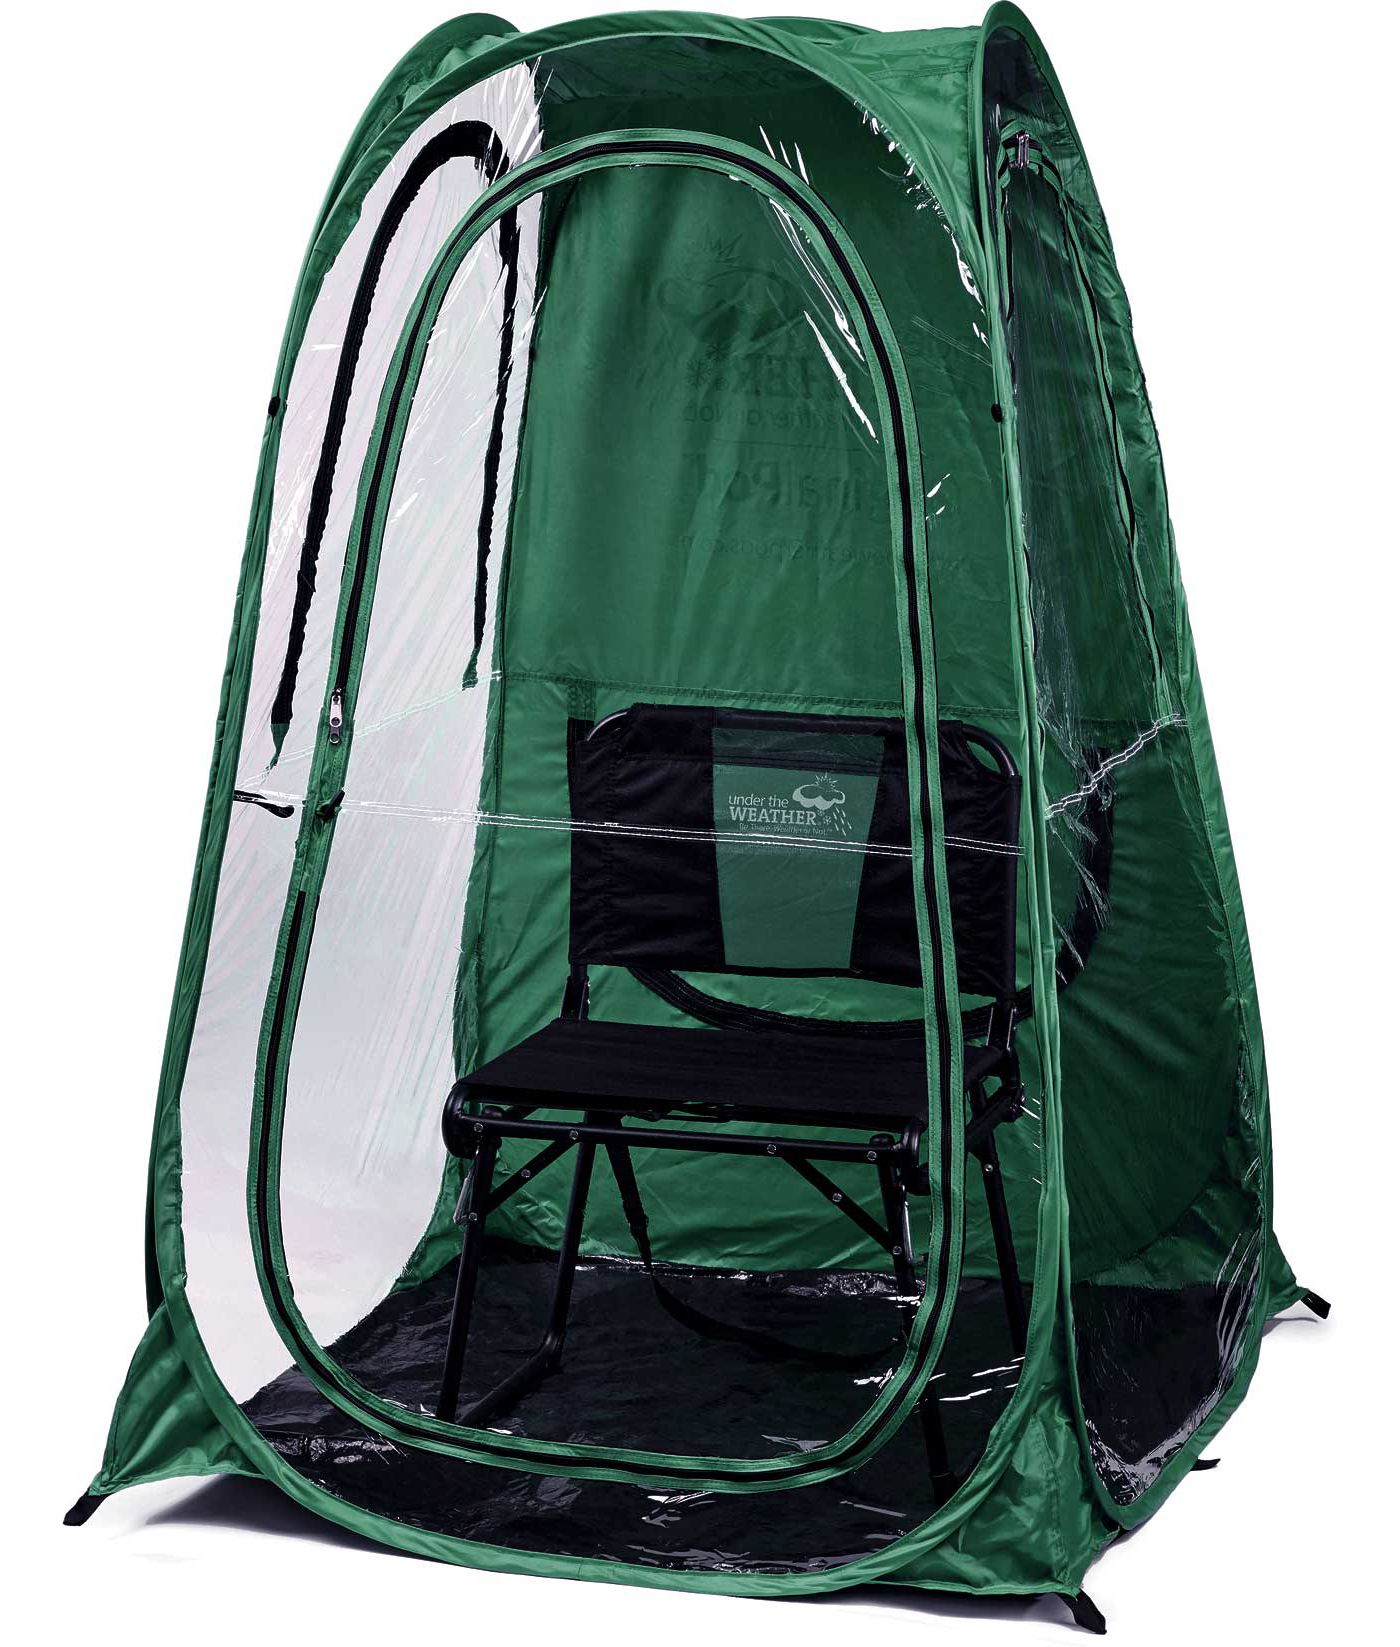 under the weather pop up tent xl